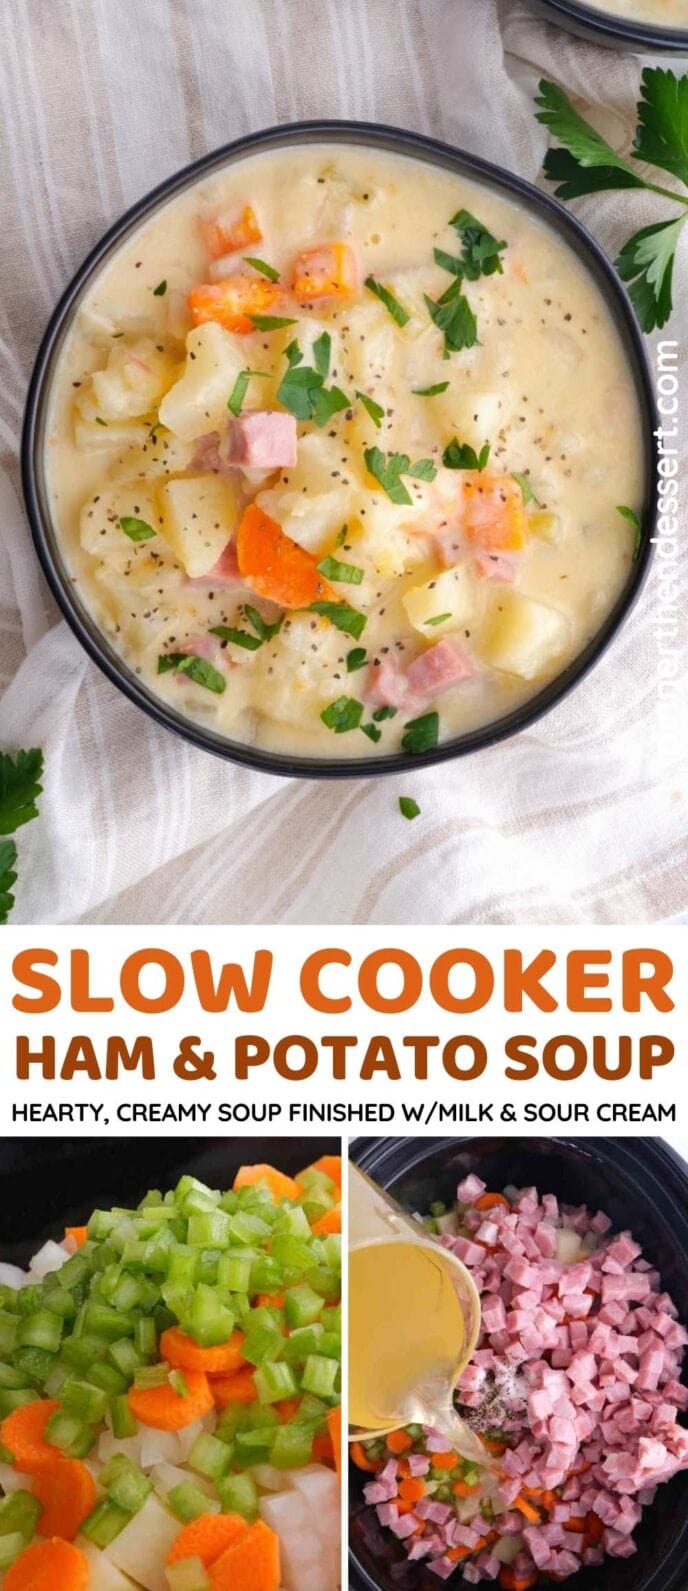 Slow Cooker Ham and Potato Soup Collage